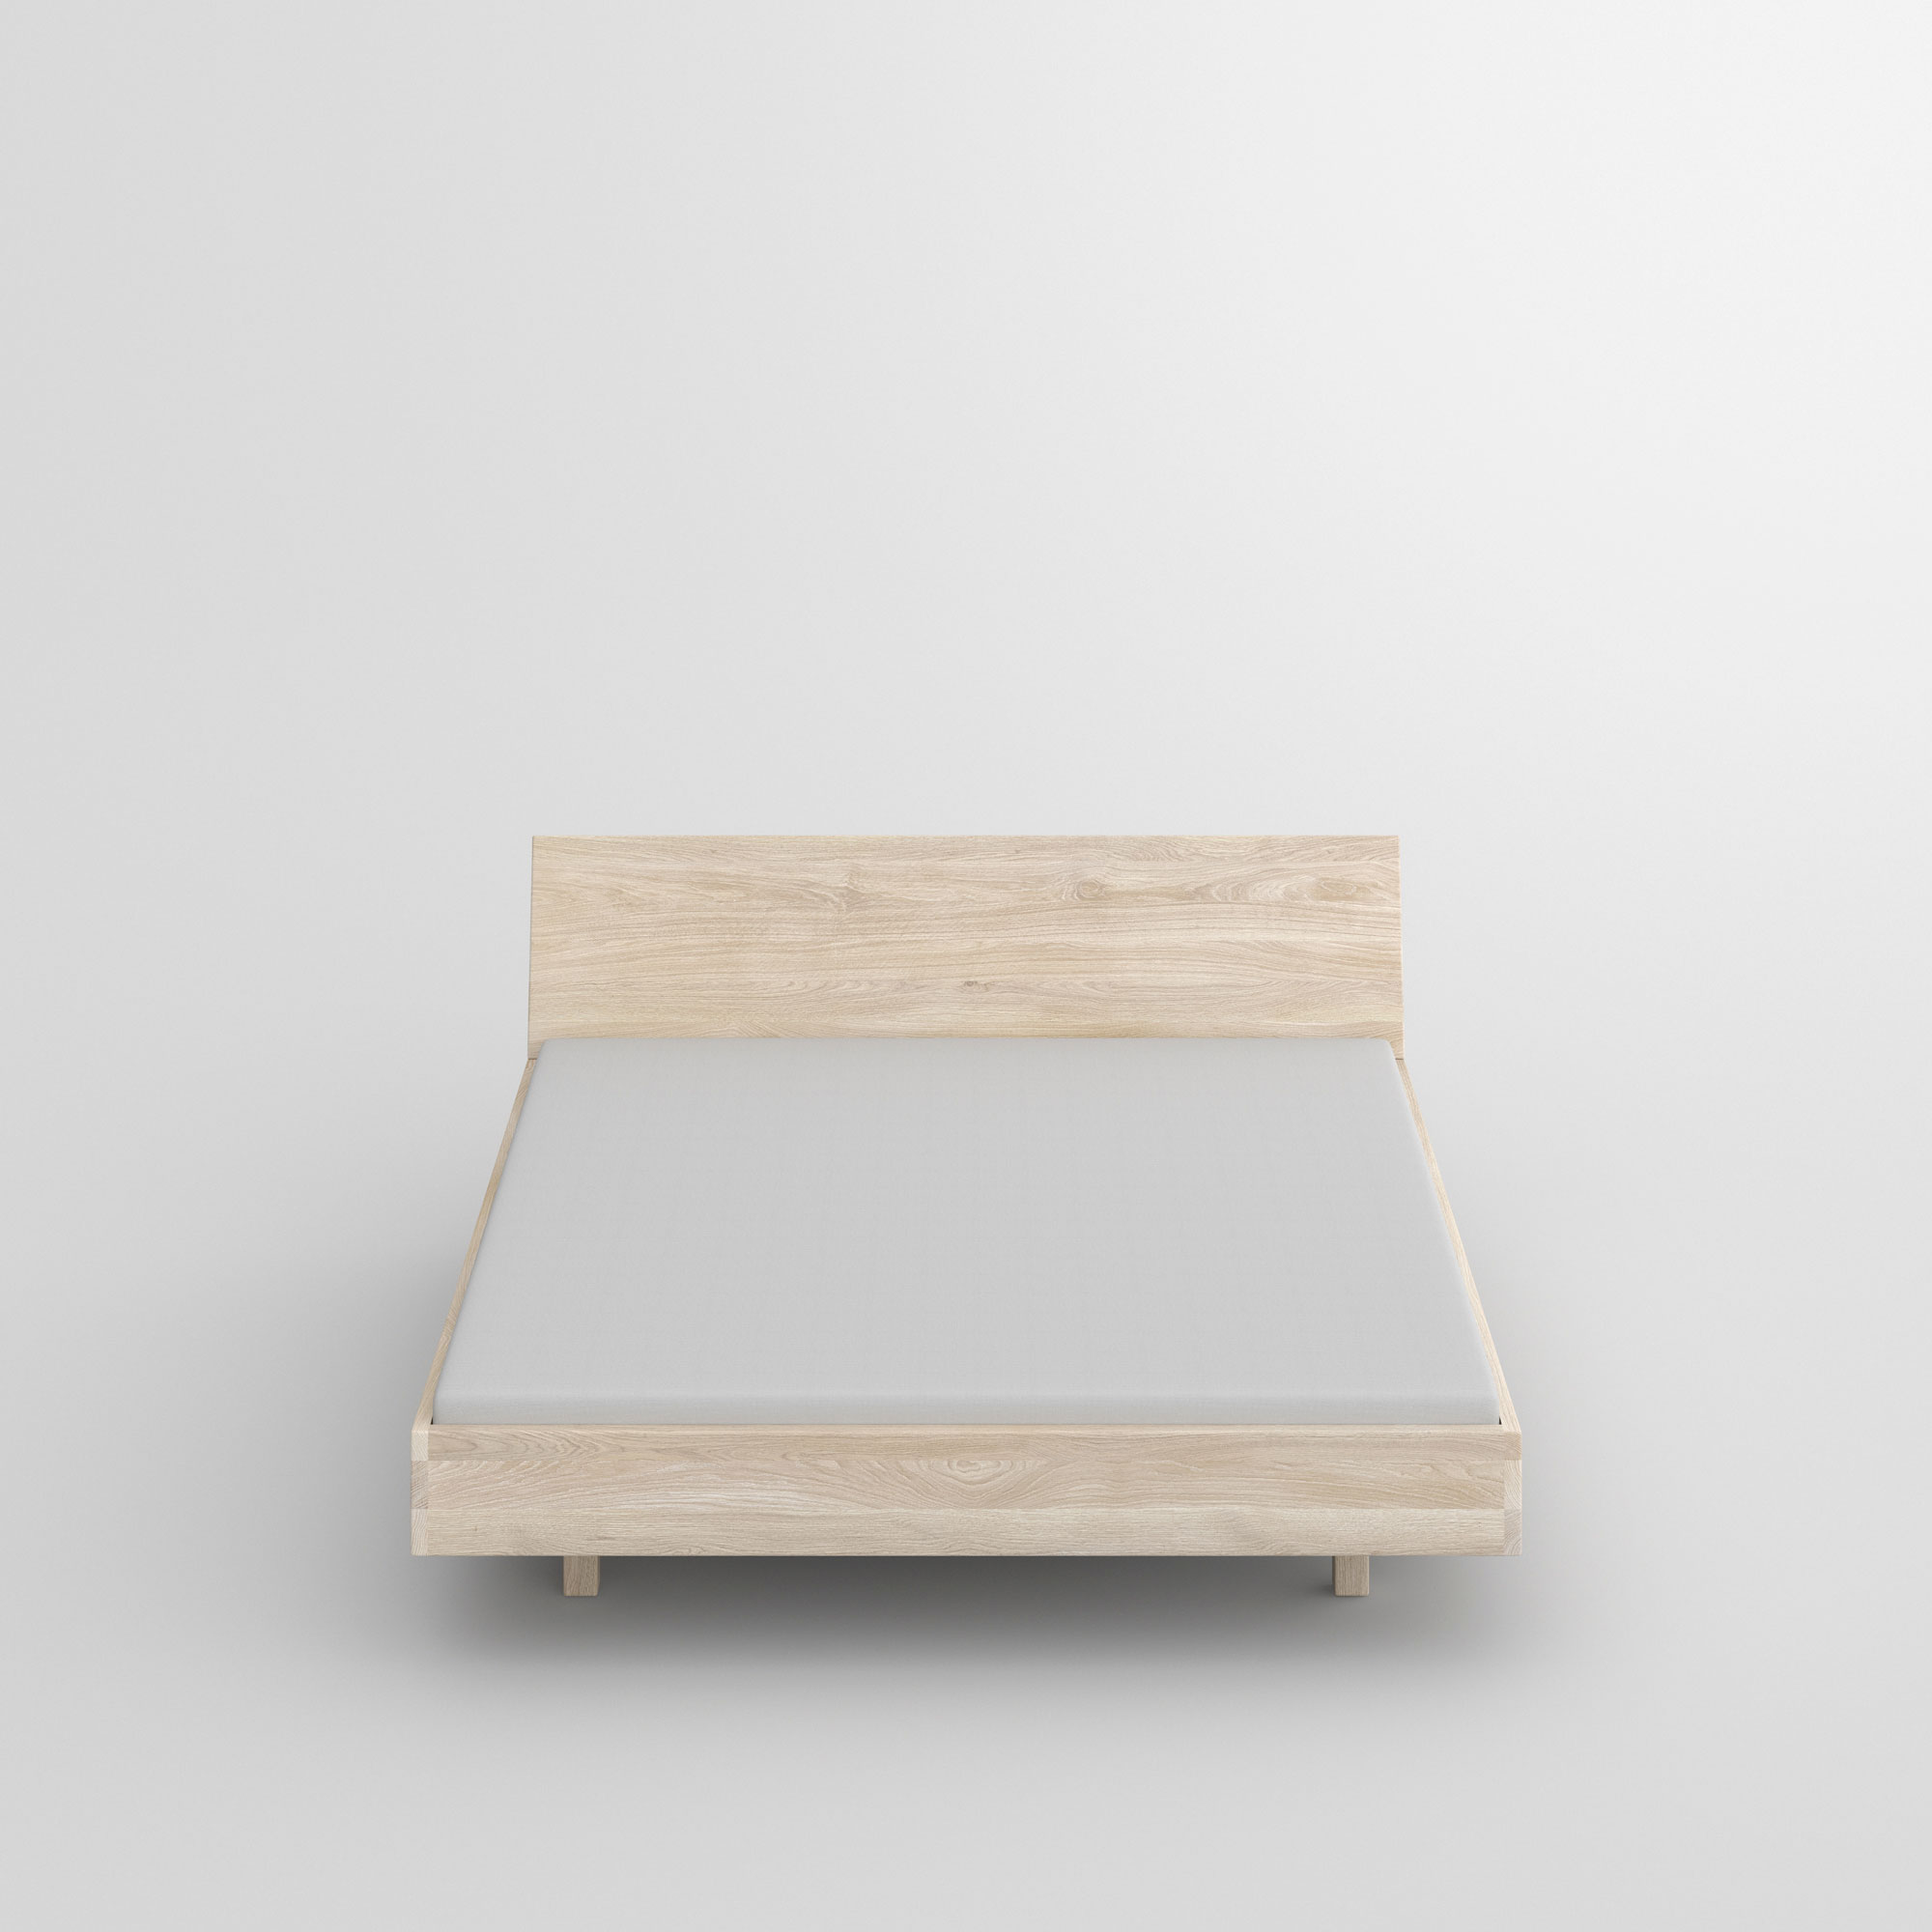 Solid Wooden Bed QUADRA SOFT cam3 custom made in solid wood by vitamin design